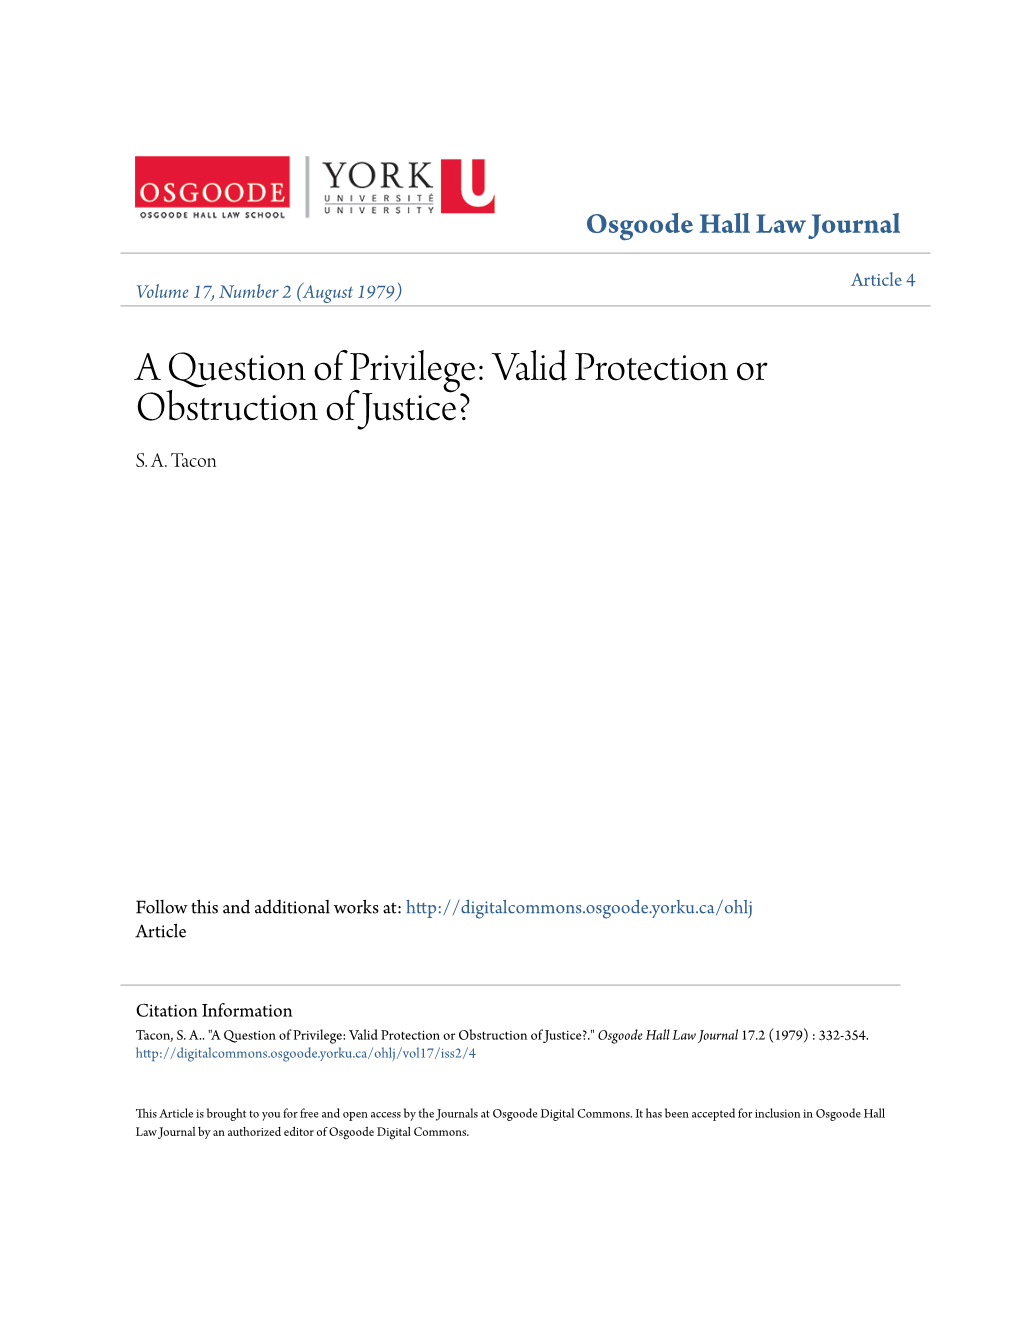 A Question of Privilege: Valid Protection Or Obstruction of Justice? S